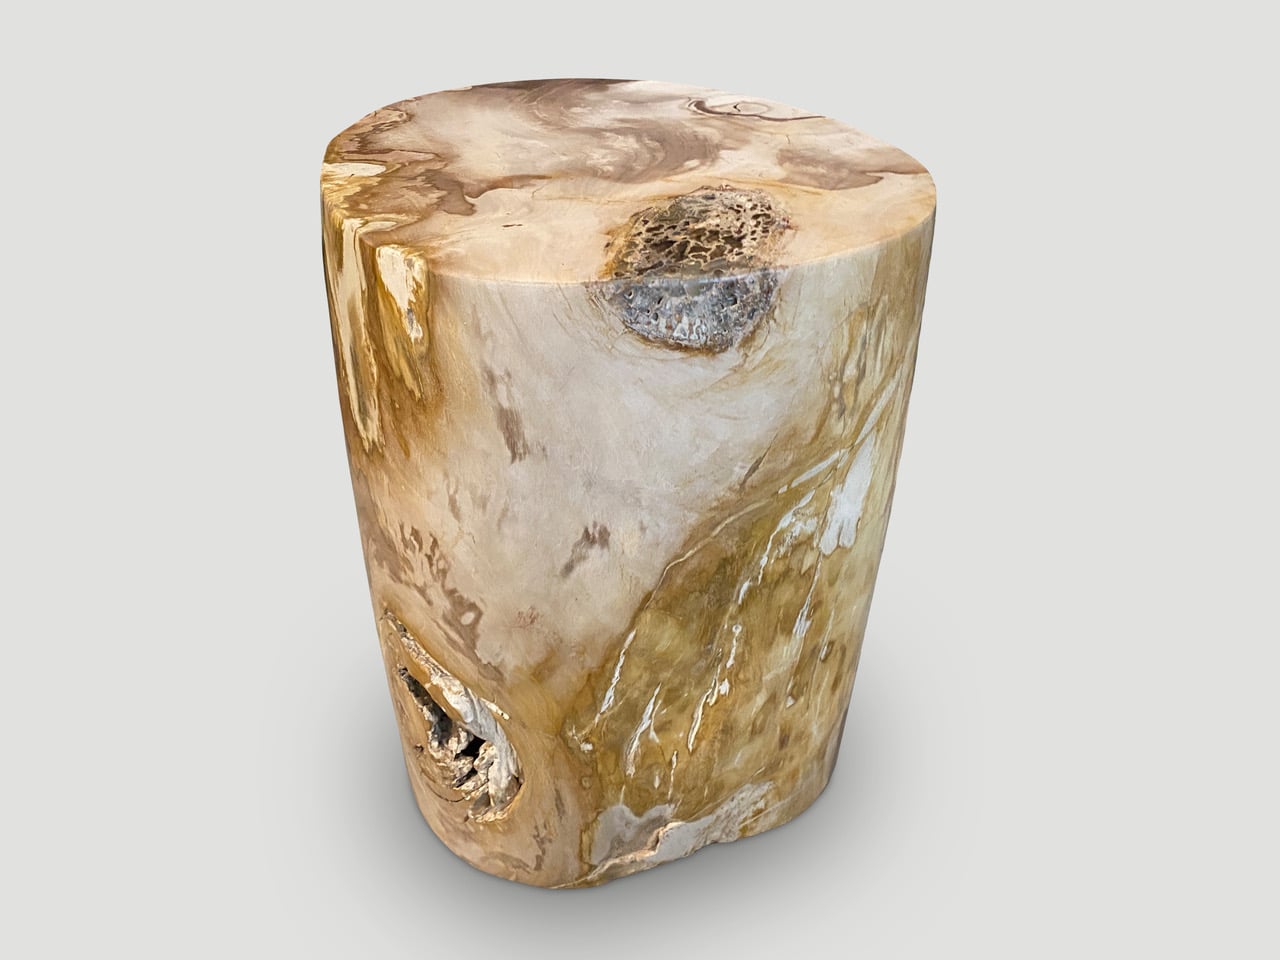 BEAUTIFUL PETRIFIED WOOD SIDE TABLE WITH CRYSTALS